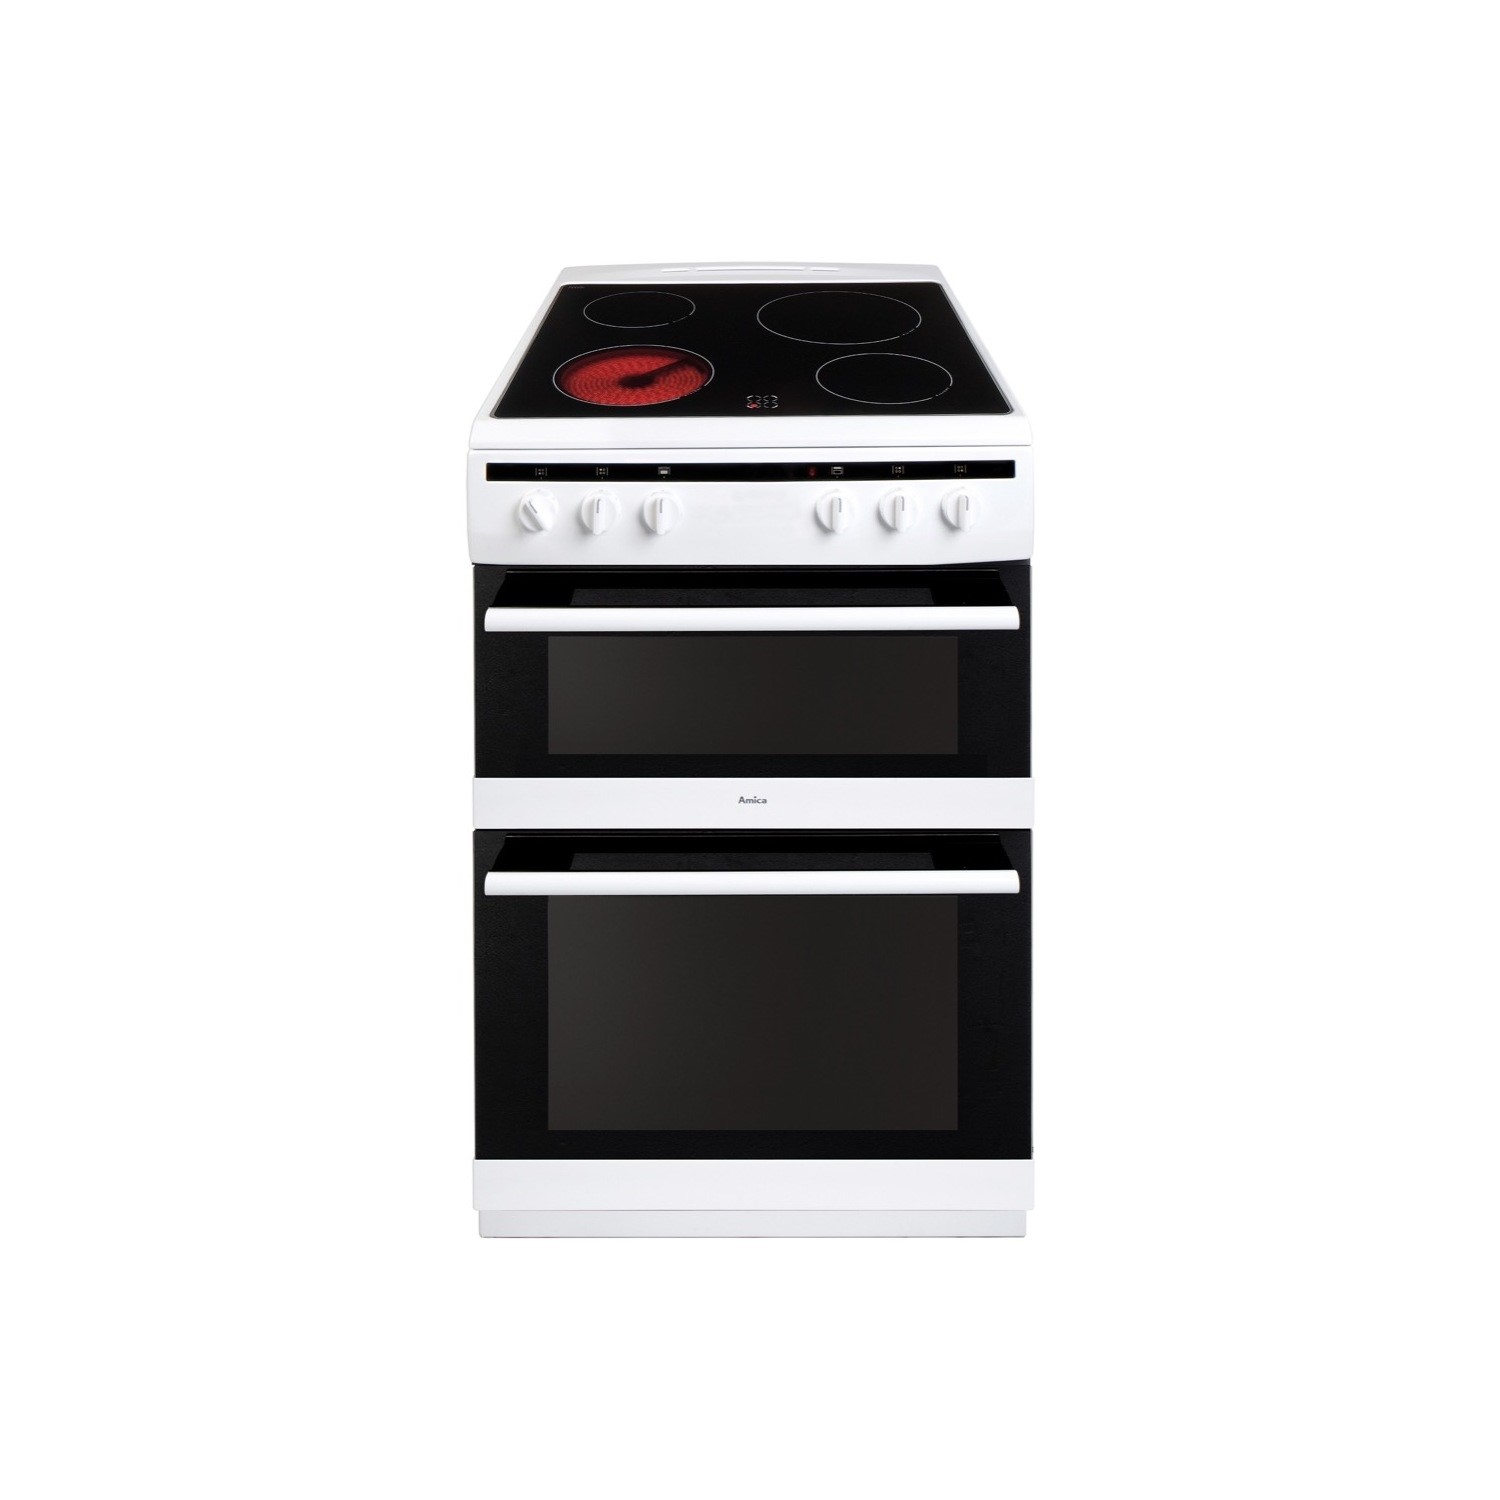 Amica 60cm Double Oven Electric Cooker with Ceramic Hob - White